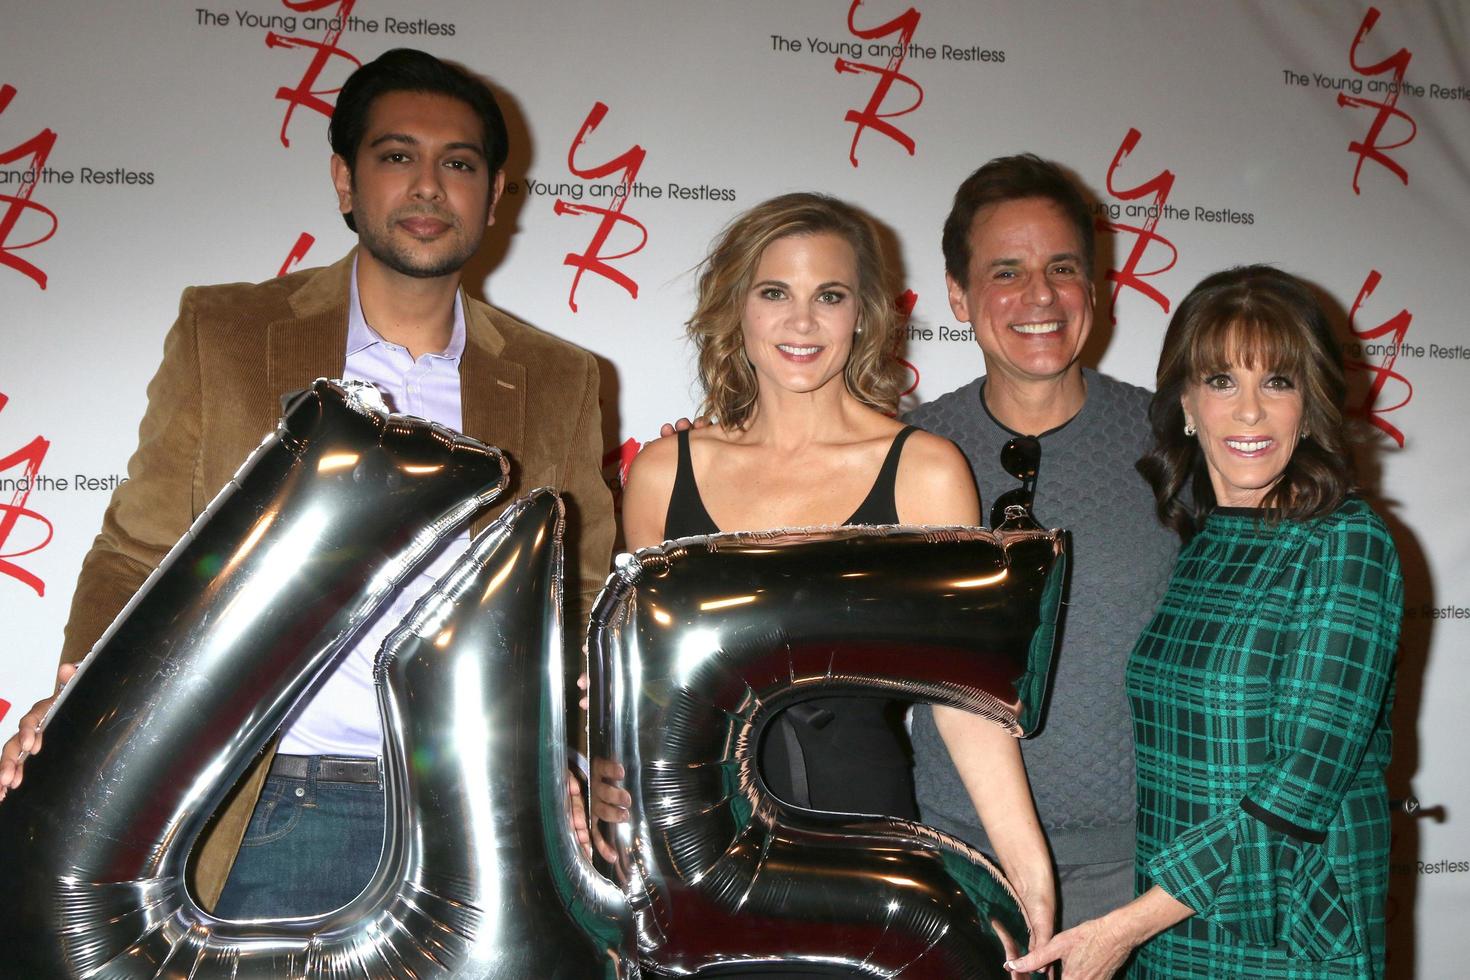 los angeles 26. märz, abhi sinha, gina tognoni, christian leblanc, kate linder bei the young and the restless feiern am 26. märz 2018 in los angeles, ca foto